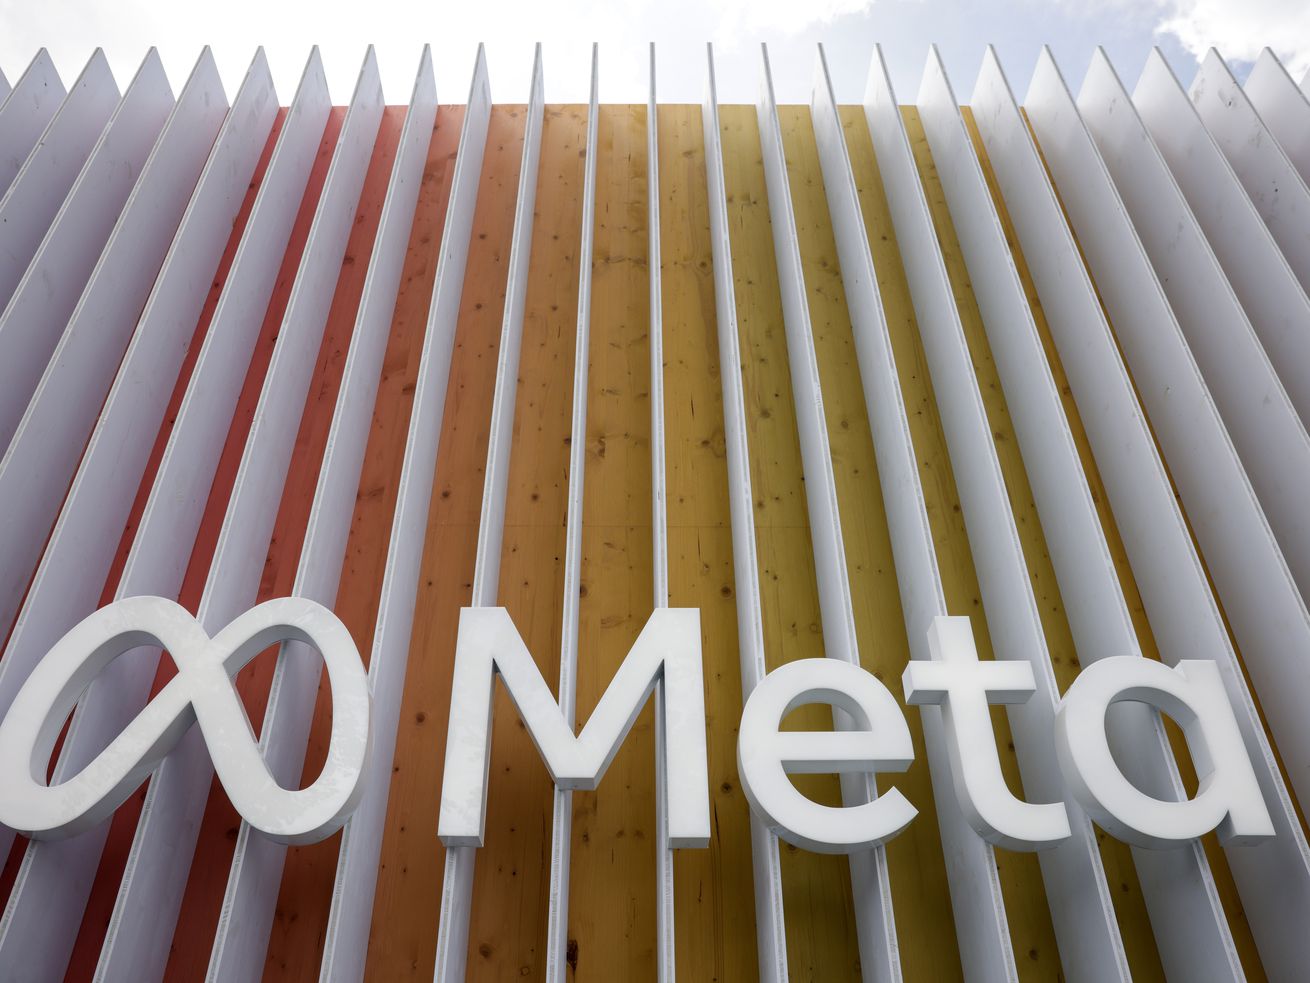 A Meta logo is shown with a background of white slats.